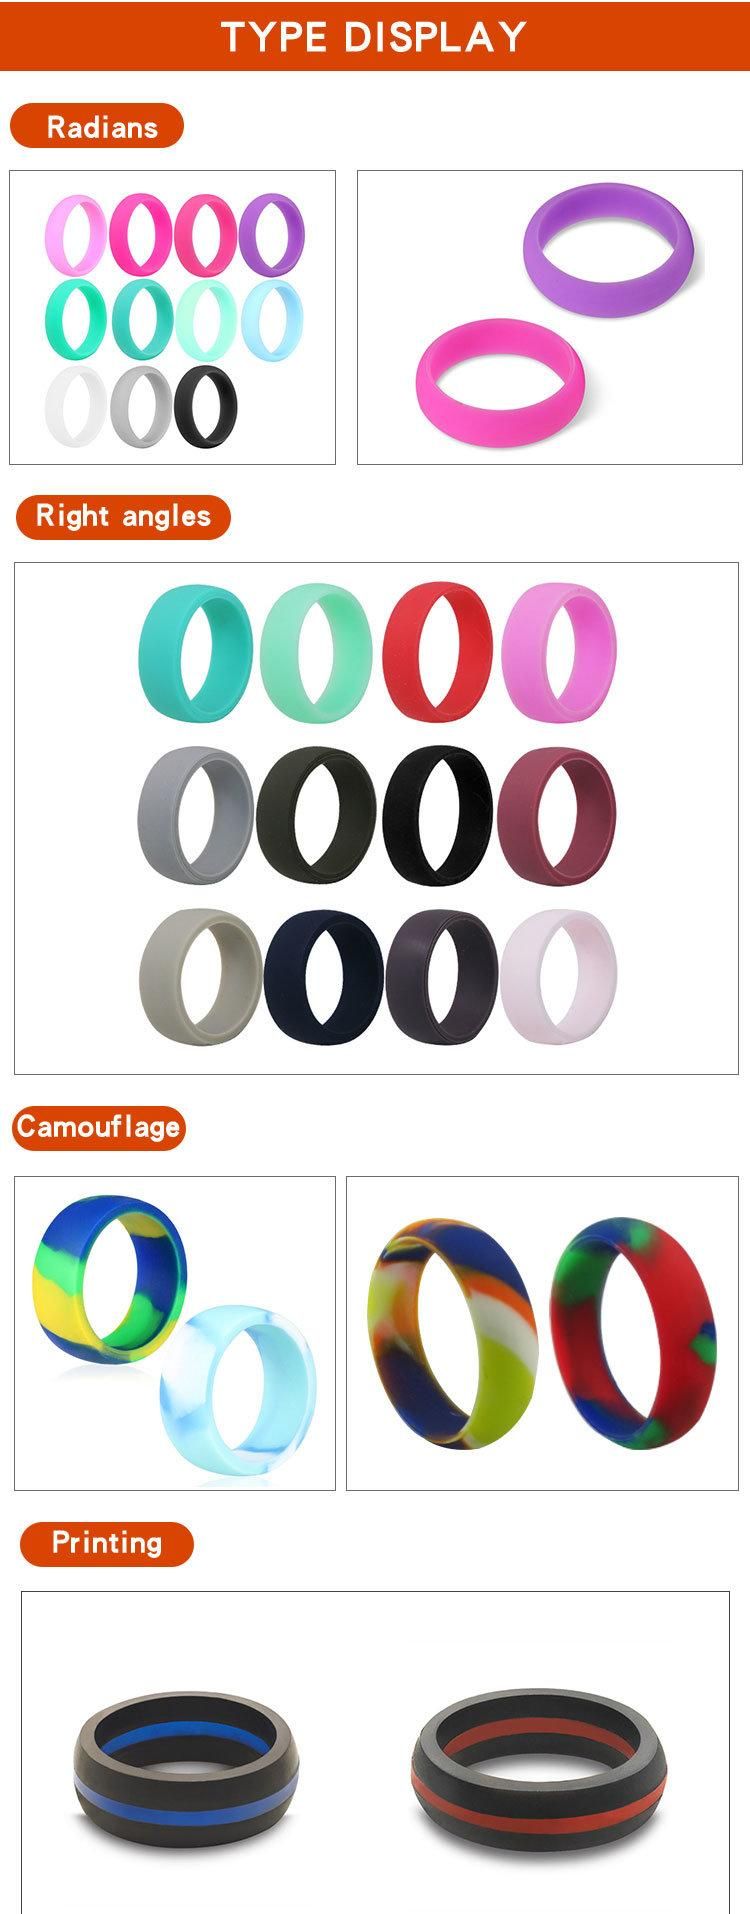 Wholesale Printable Single Color Golden Silicone O Ring for Men